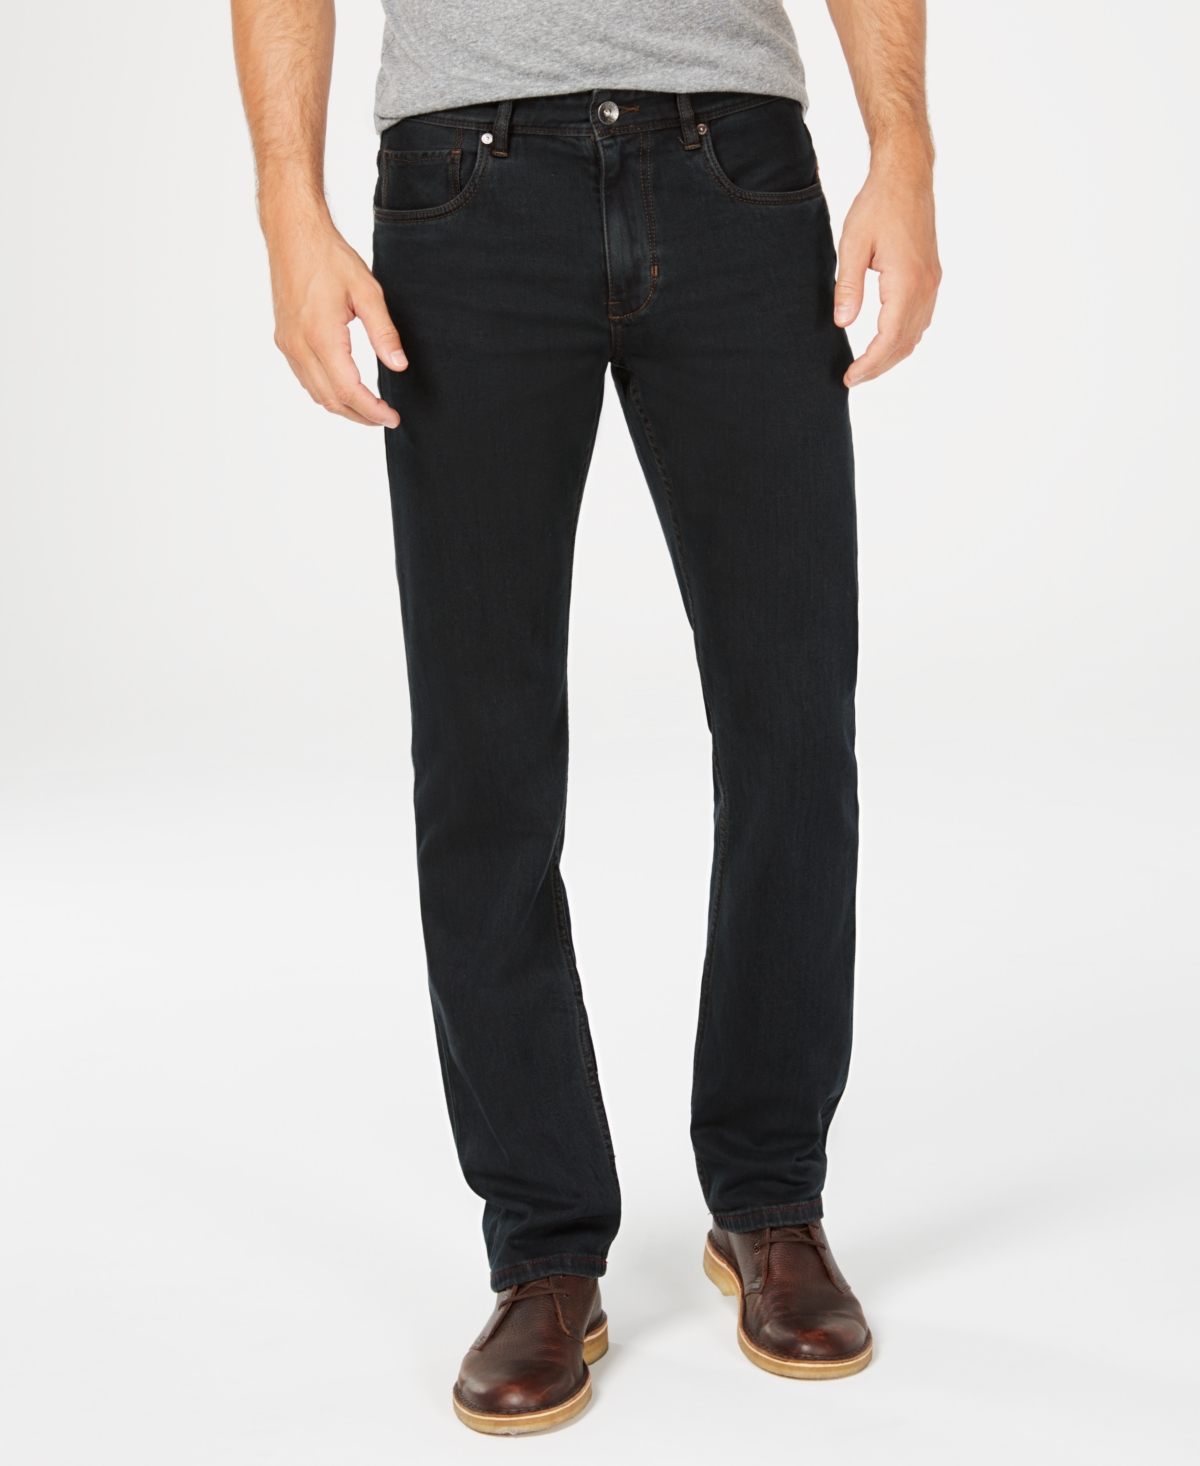 UPC 719260422483 product image for Tommy Bahama Men's Antigua Cove Authentic Fit Jeans | upcitemdb.com